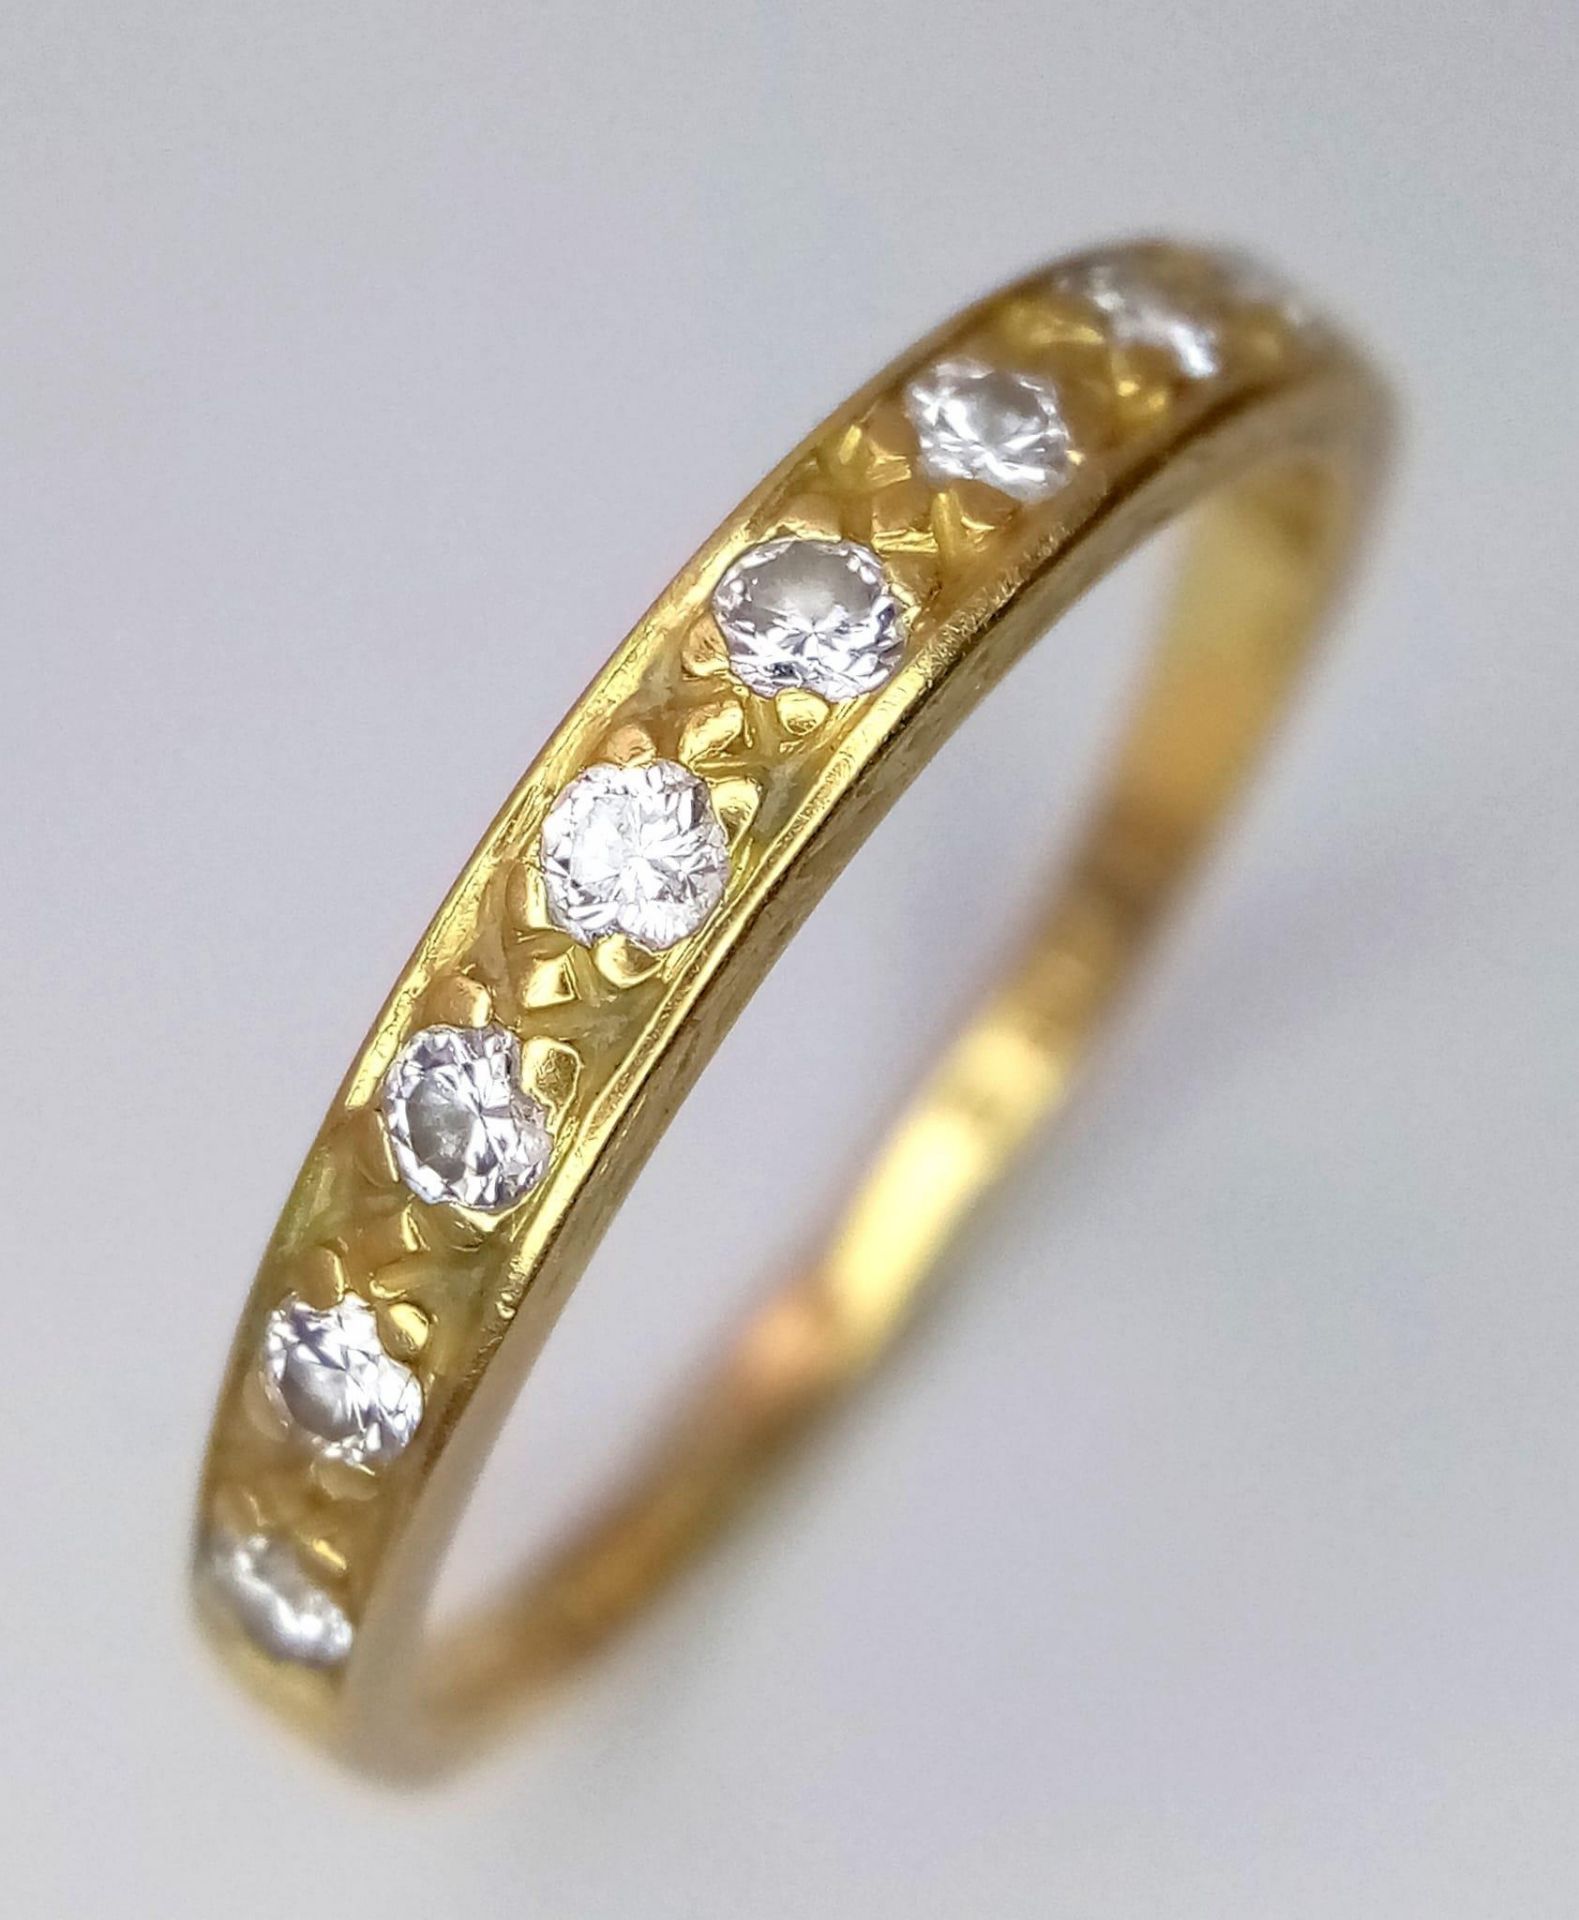 An 18K Yellow Gold Diamond Set Band Ring. Size P, 0.20ctw, 2.2g total weight.